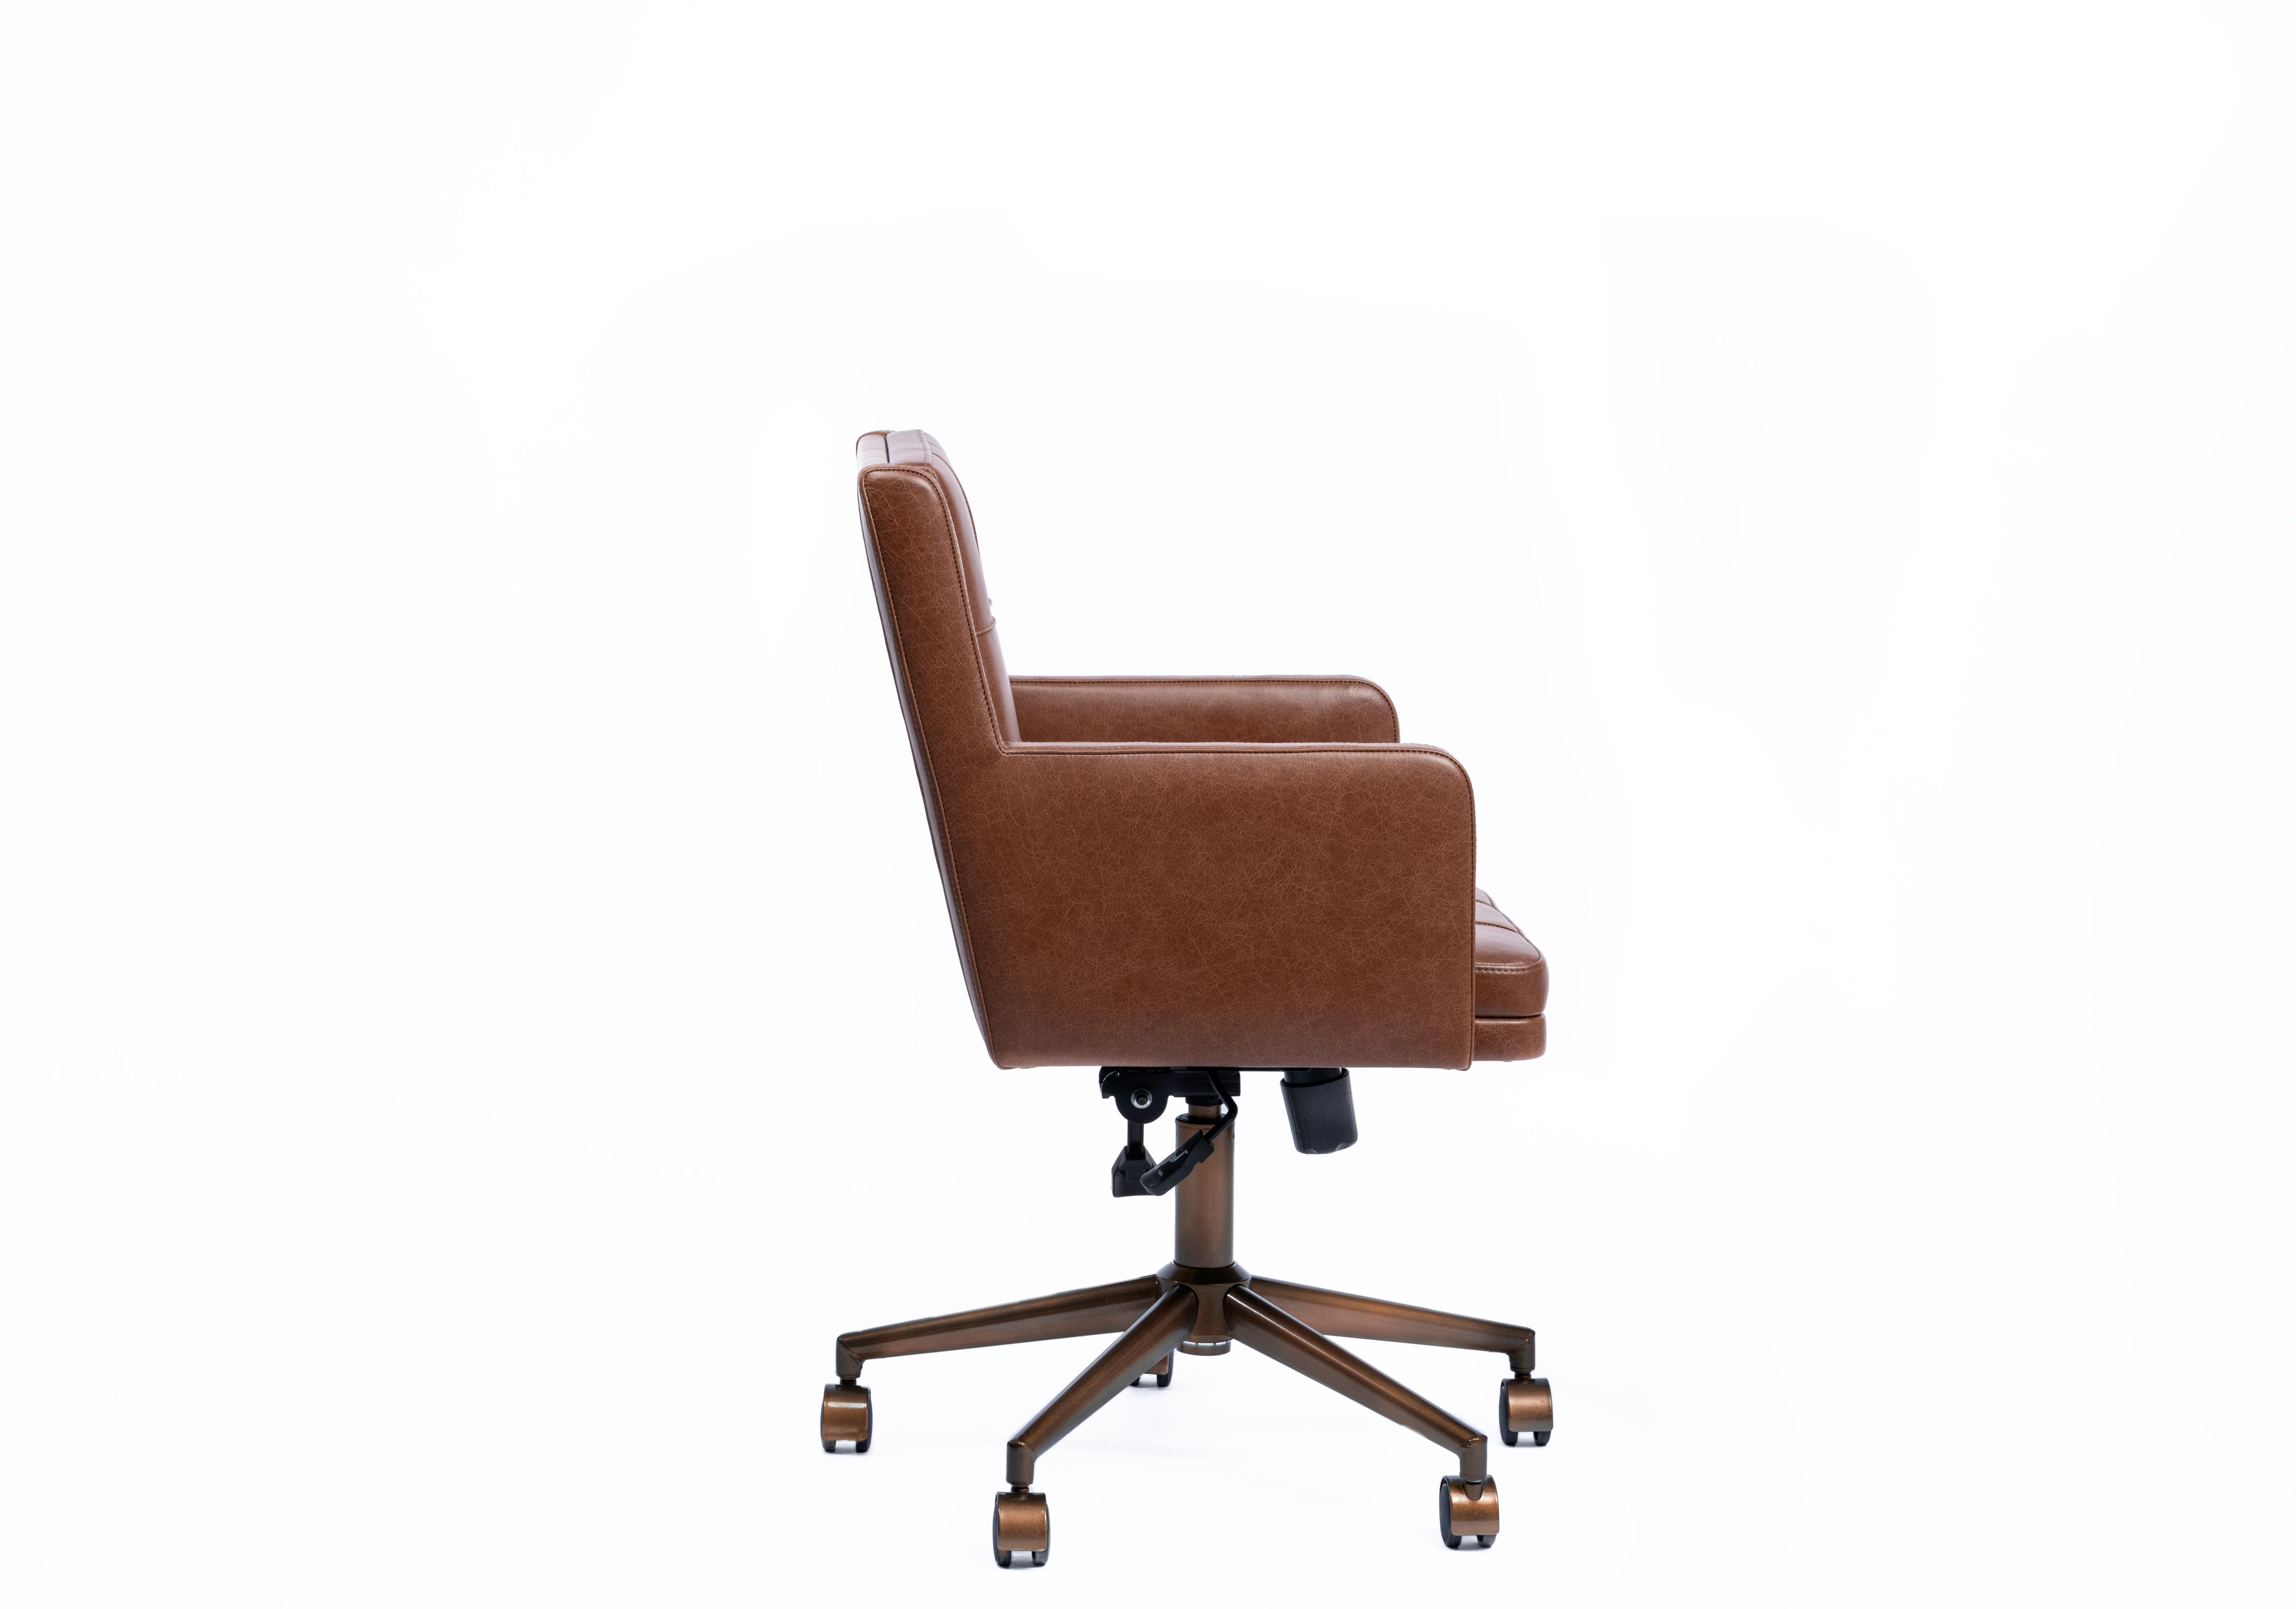 Contemporary Office Chair, International Style Wooden Office Chair For Sale